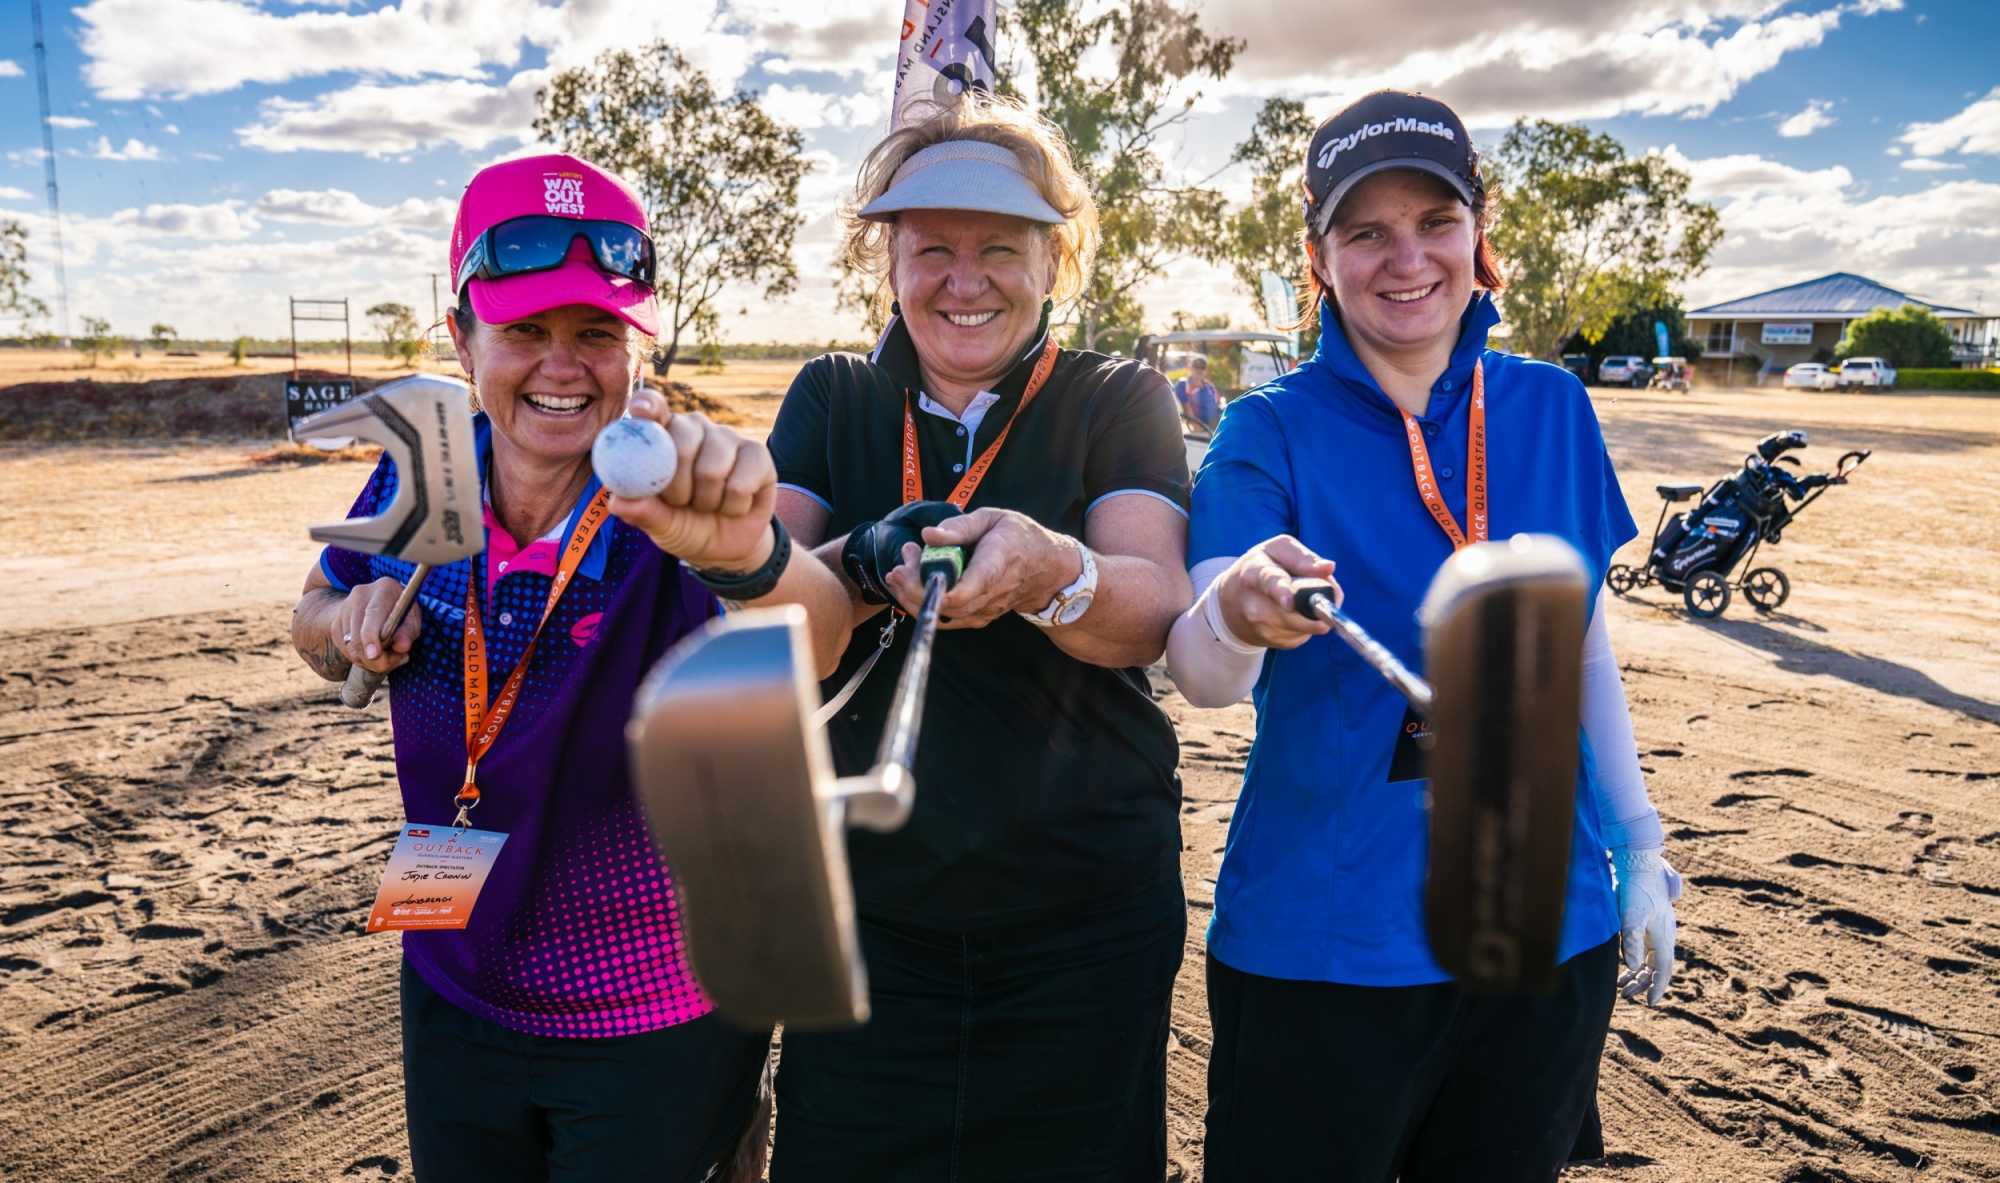 Participants enjoying the 2019 Outback Queensland Masters.